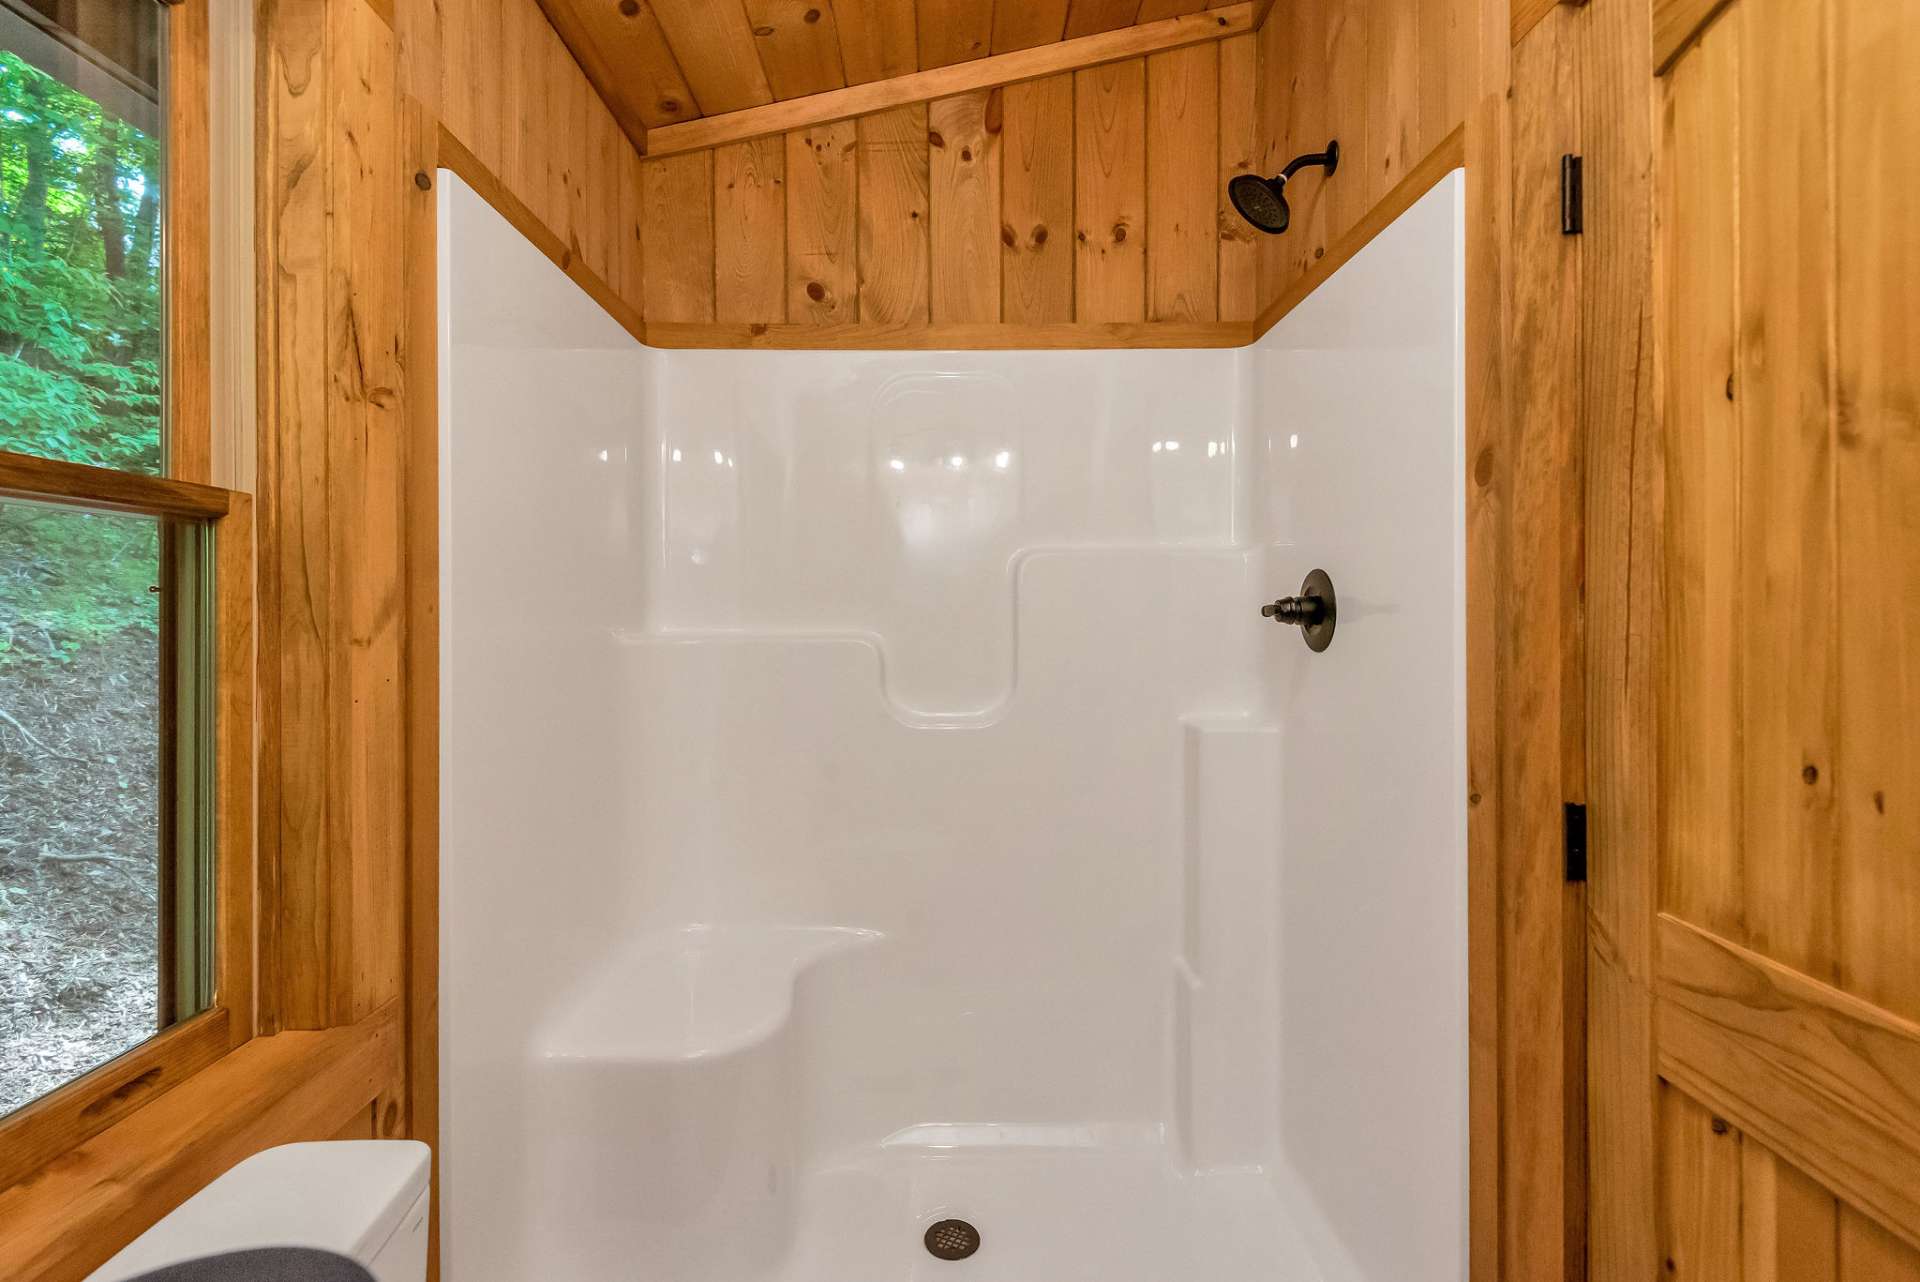 A fiberglass shower with a comfortable seat offers convenience and relaxation in the ensuite bathroom.